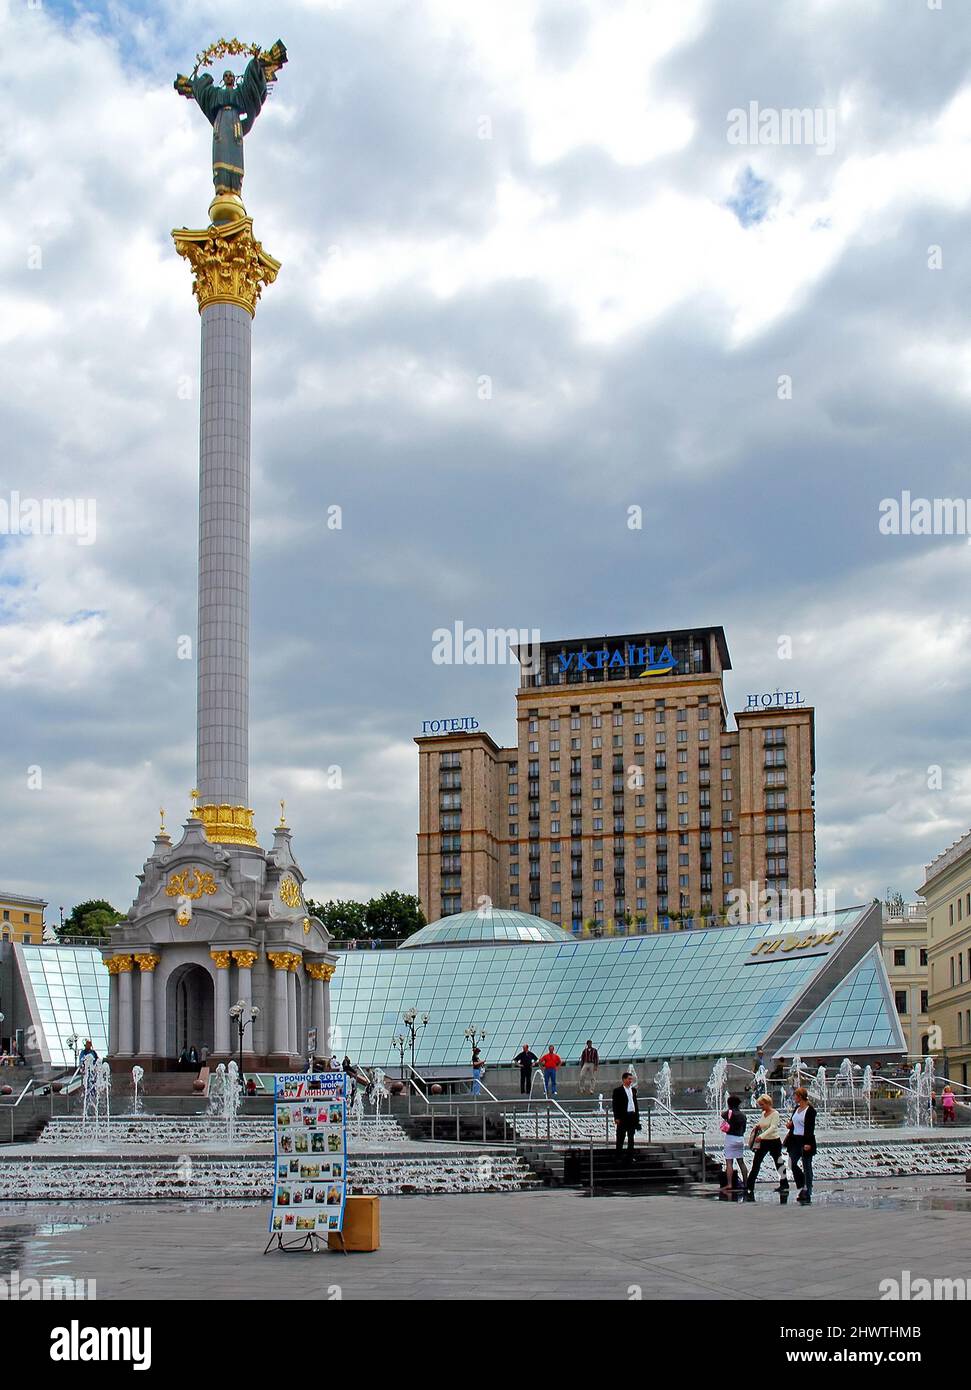 Kyiv or Kiev, Ukraine: Maidan Square or Independence Square with view of the plaza, Independence Monument, Globus Shopping Mall and Hotel Ukraine. Stock Photo